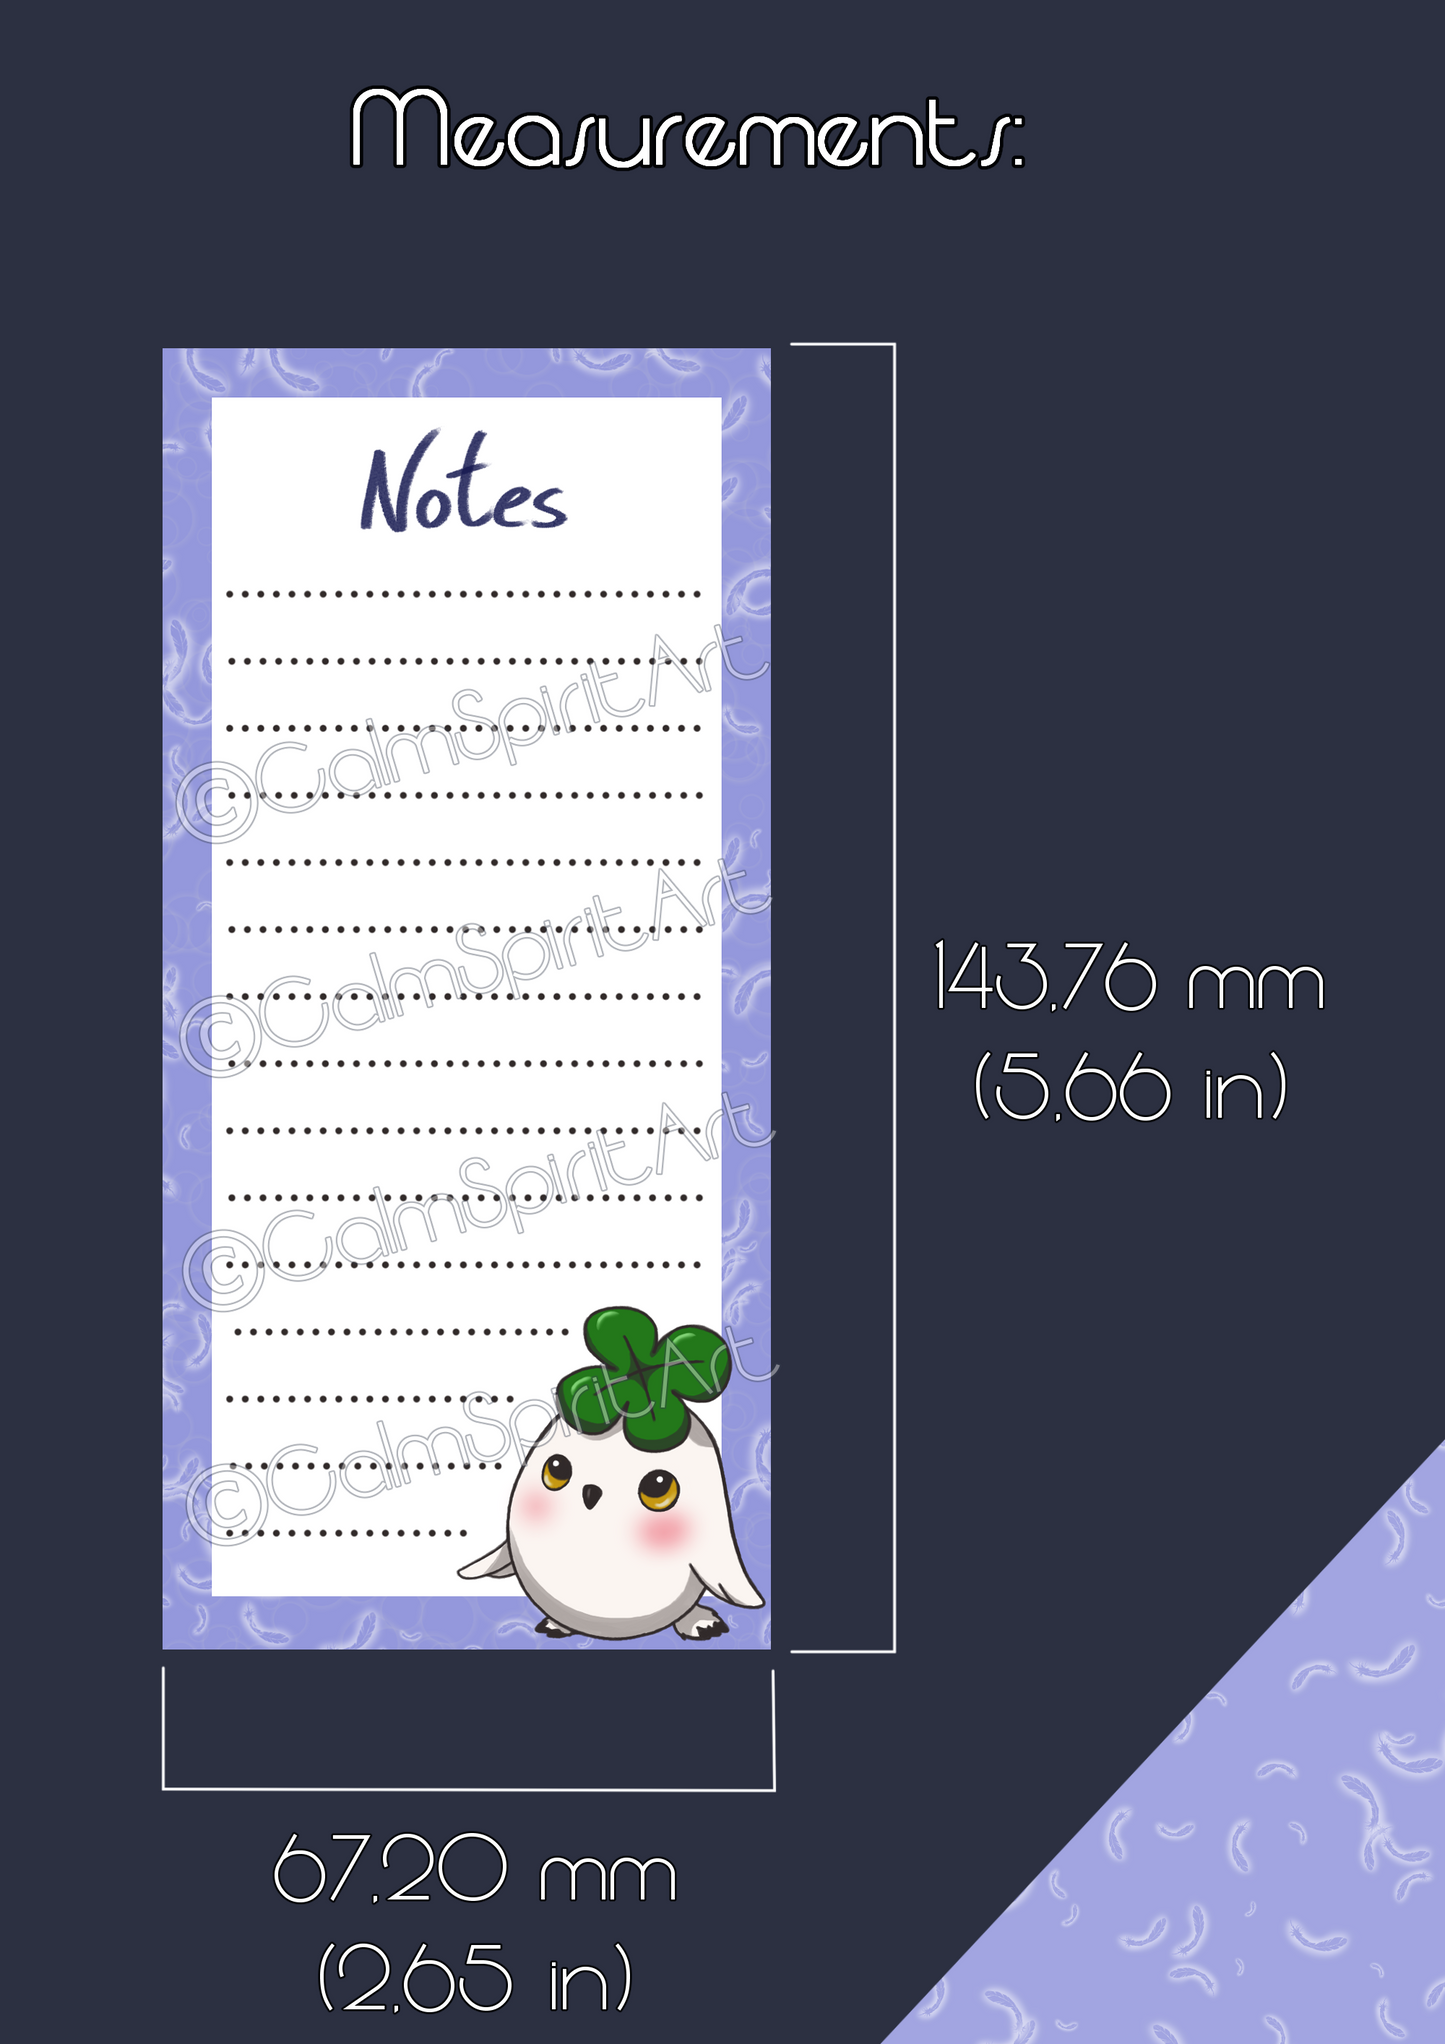 Instant download: Notepad design 2-pack "Timmi & Grumpy" incl. tutorial